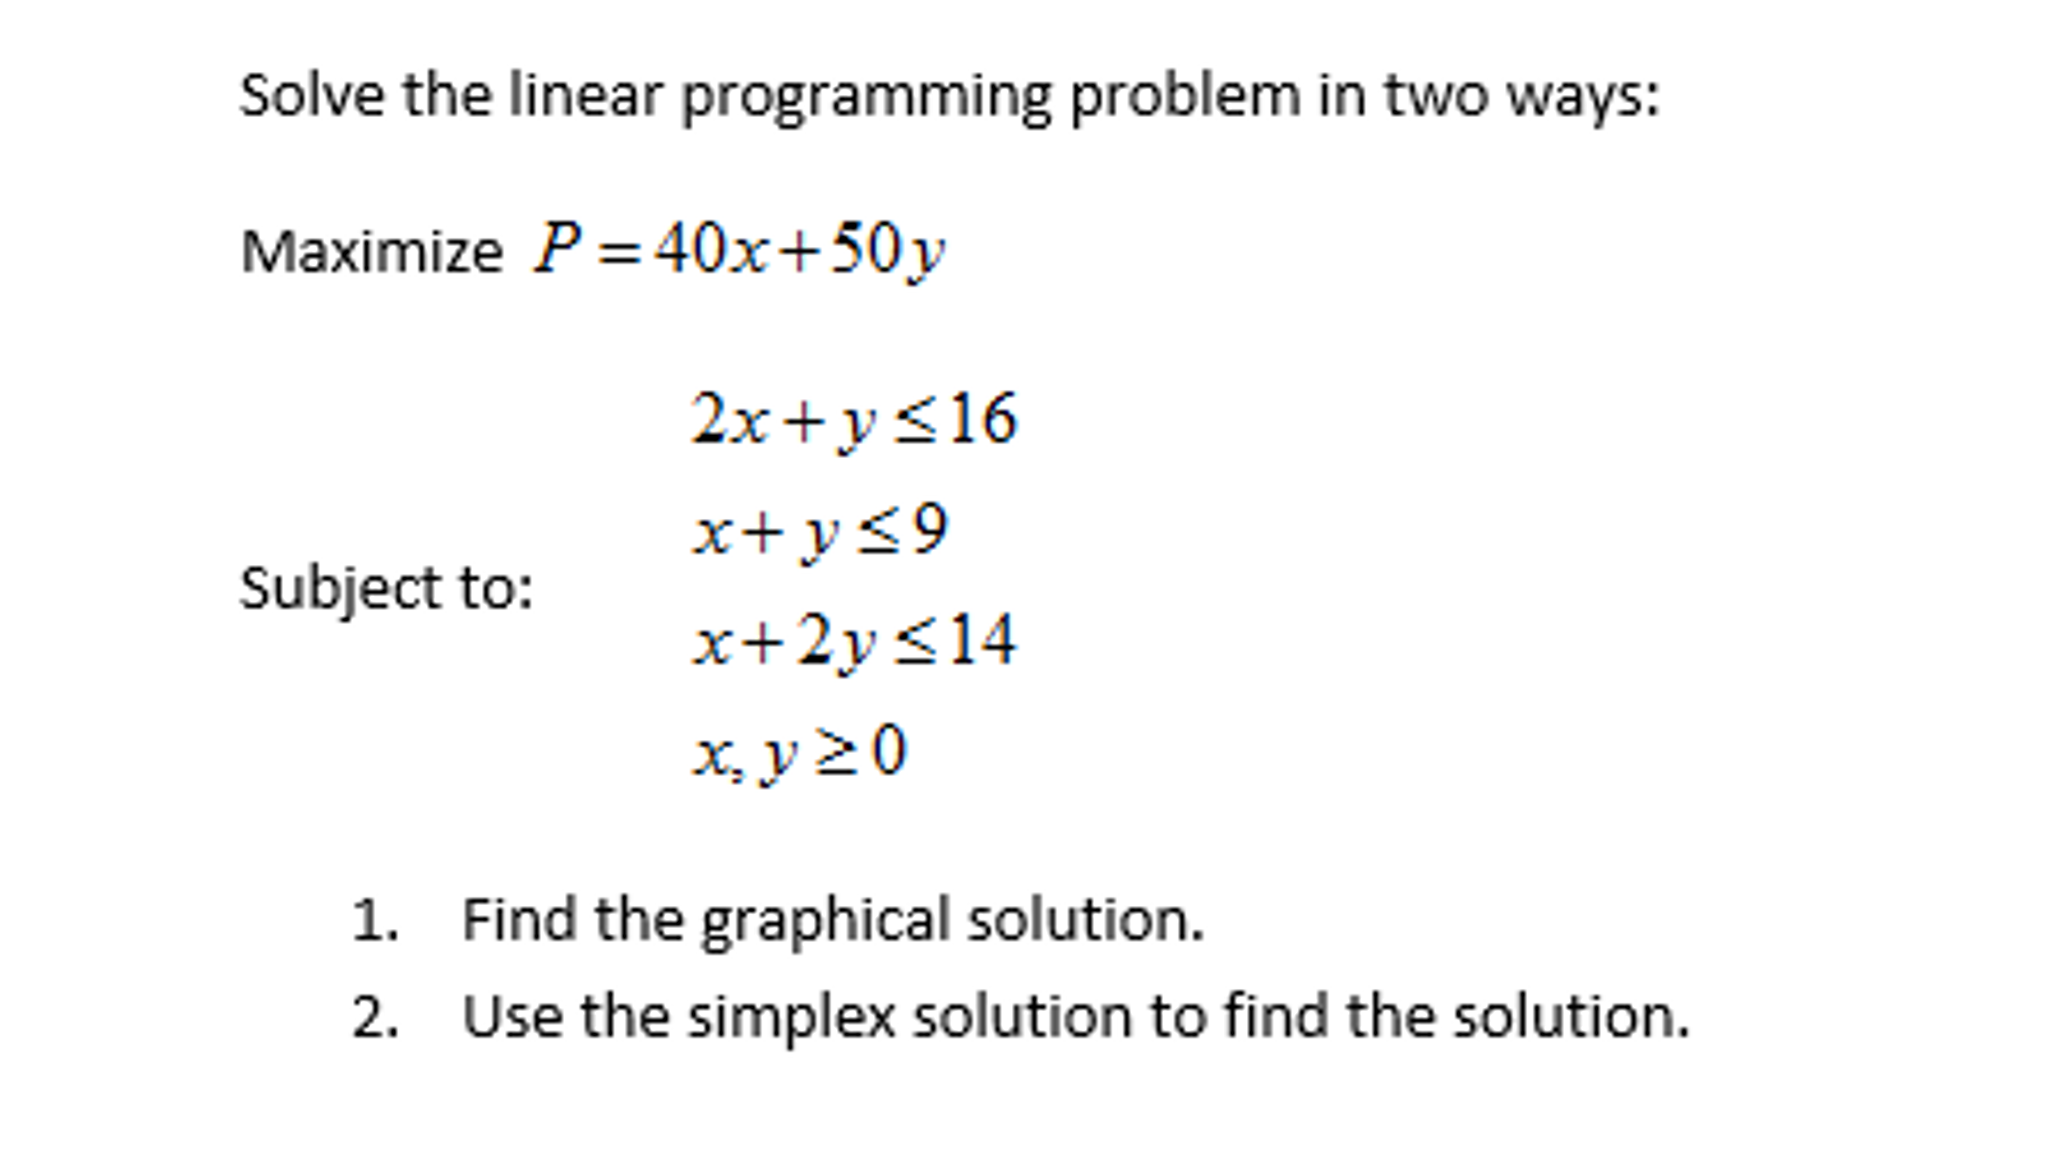 solve the following linear programming problem